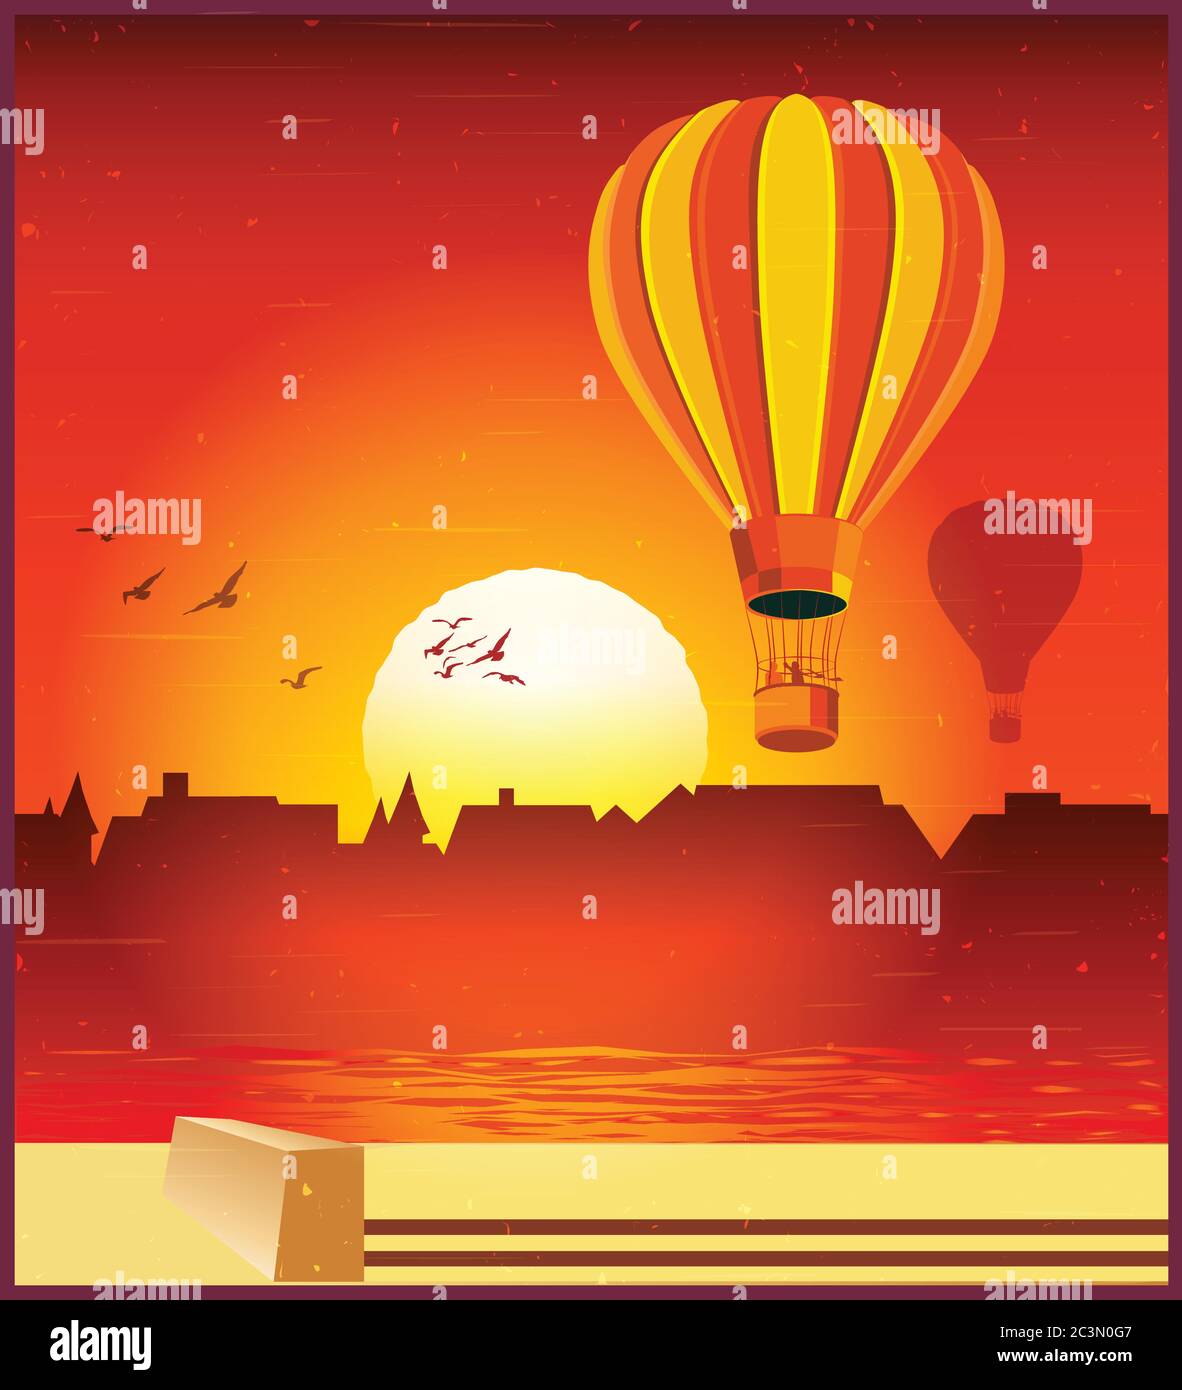 Vector illustration of balloons flying over the city in the setting sun Stock Vector